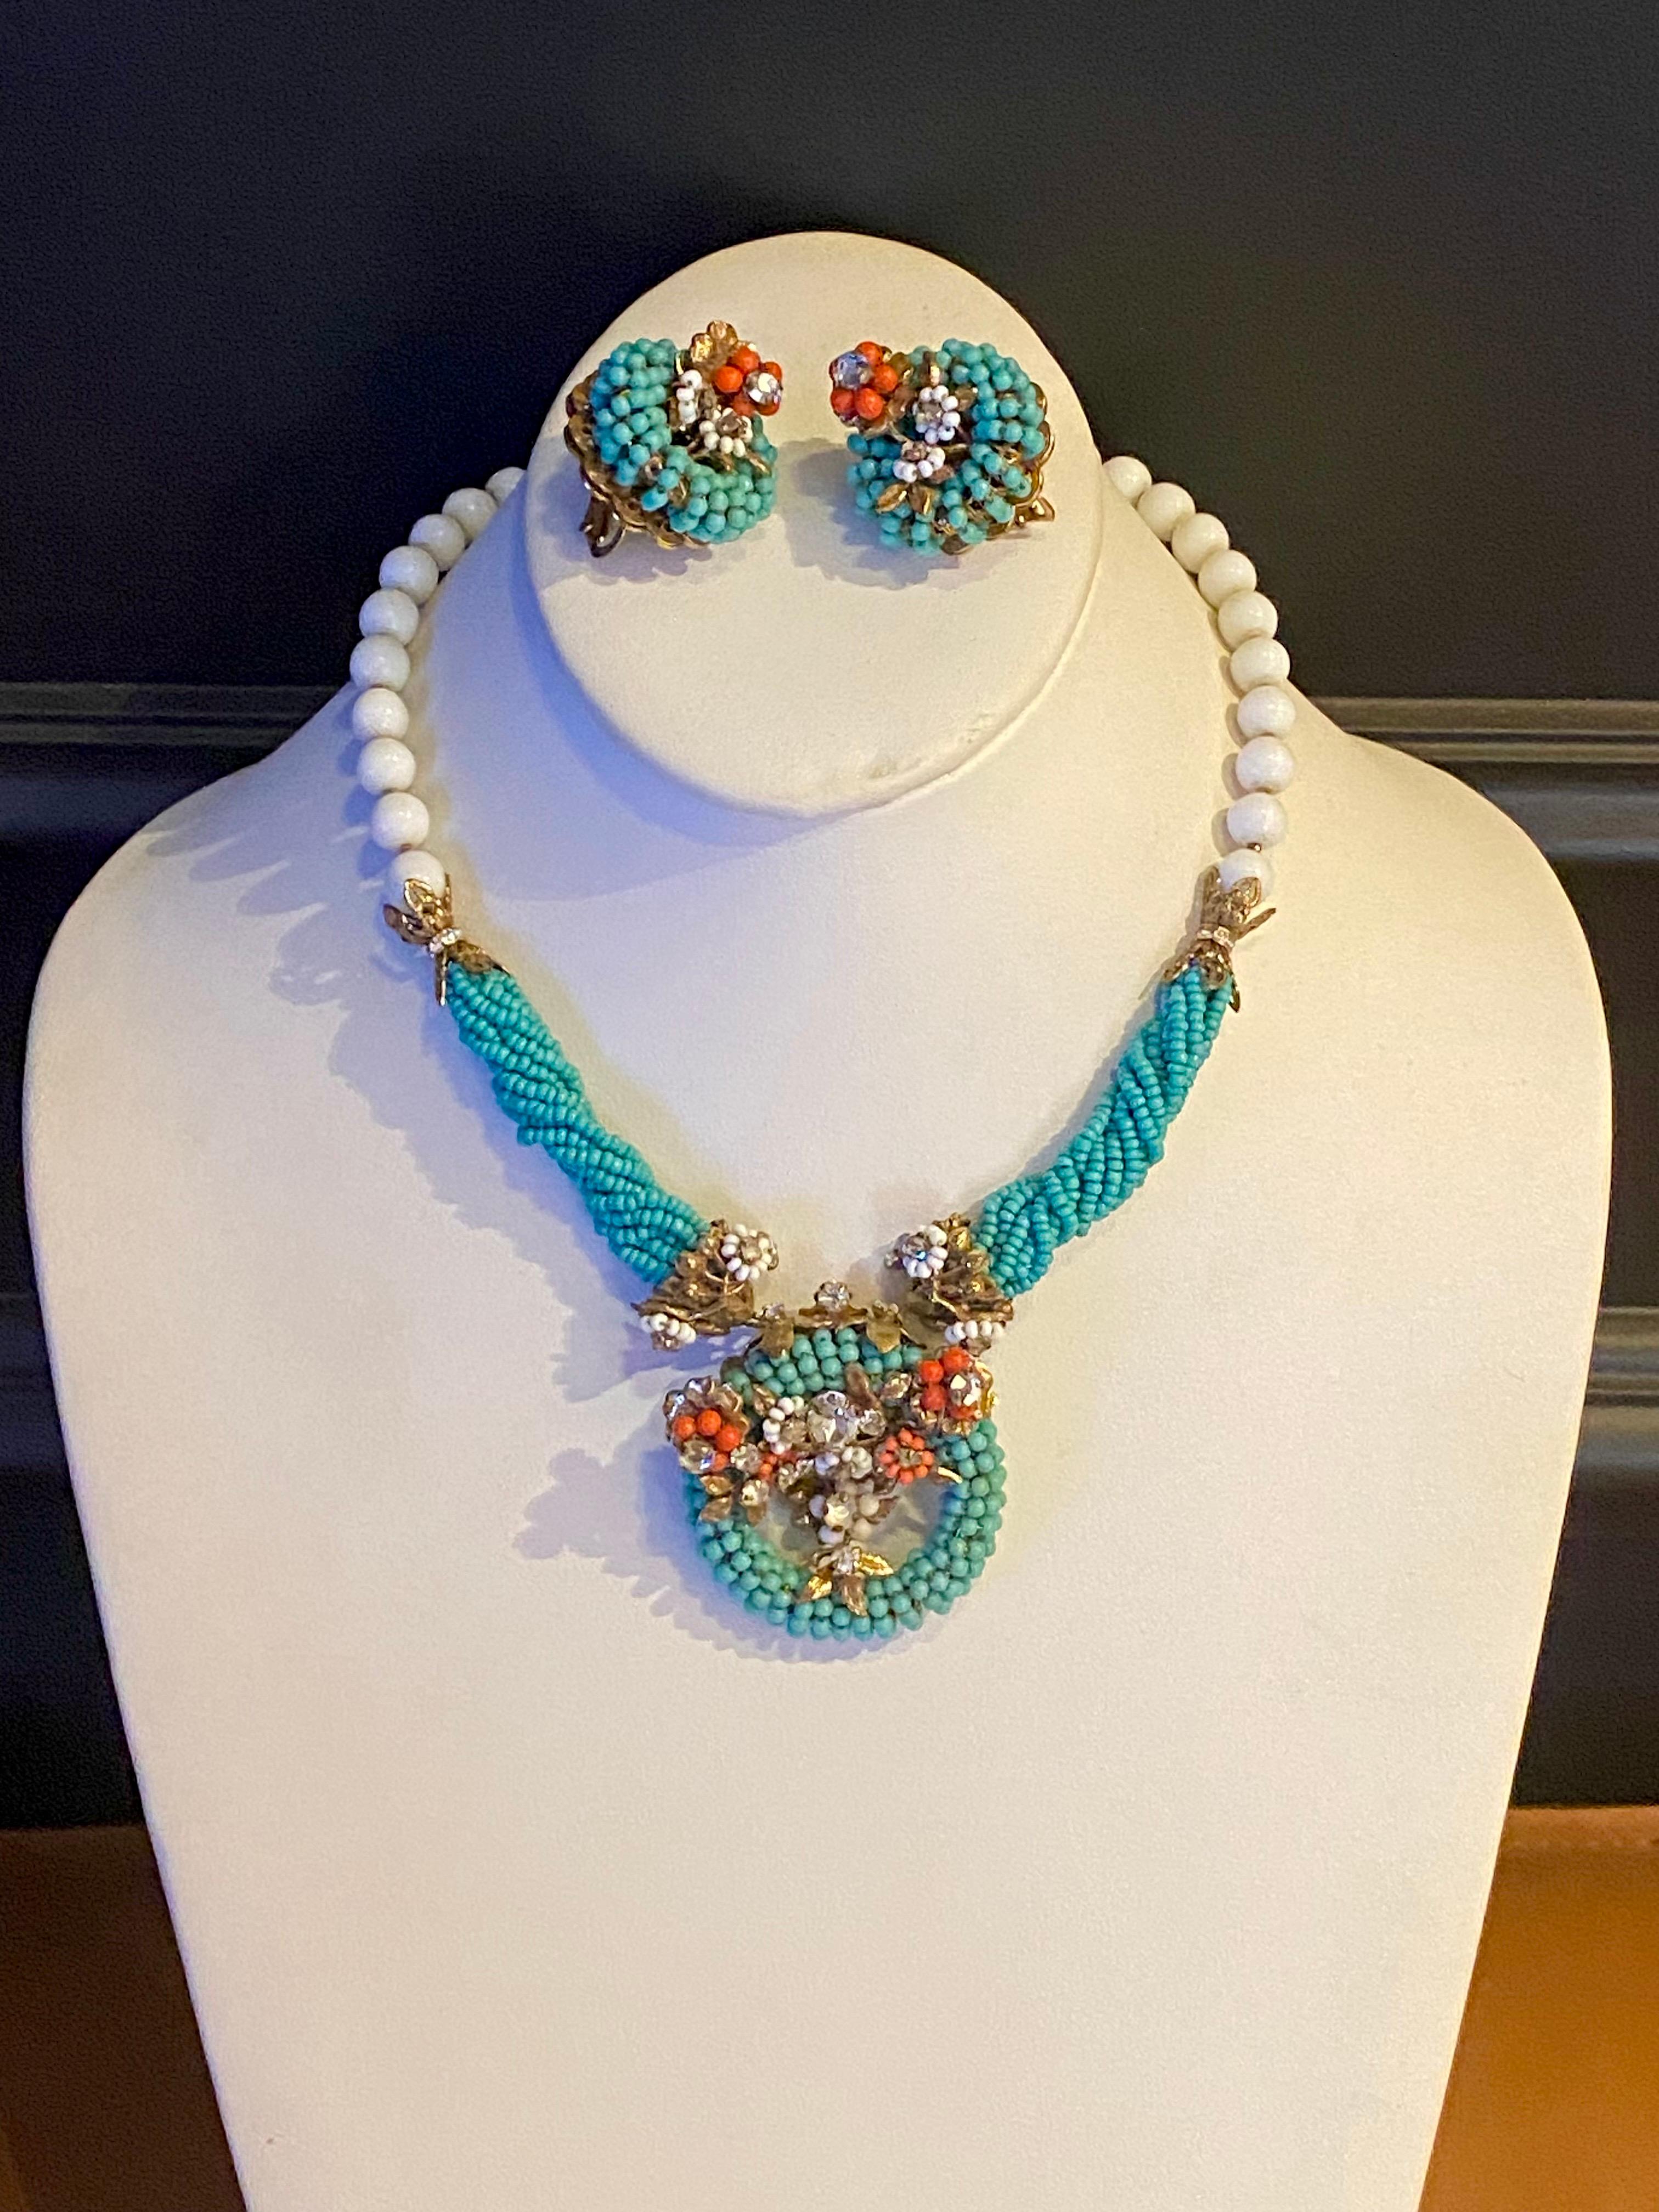 Original by Robert 1950s turquoise, coral & white glass beed necklace & earrings For Sale 1